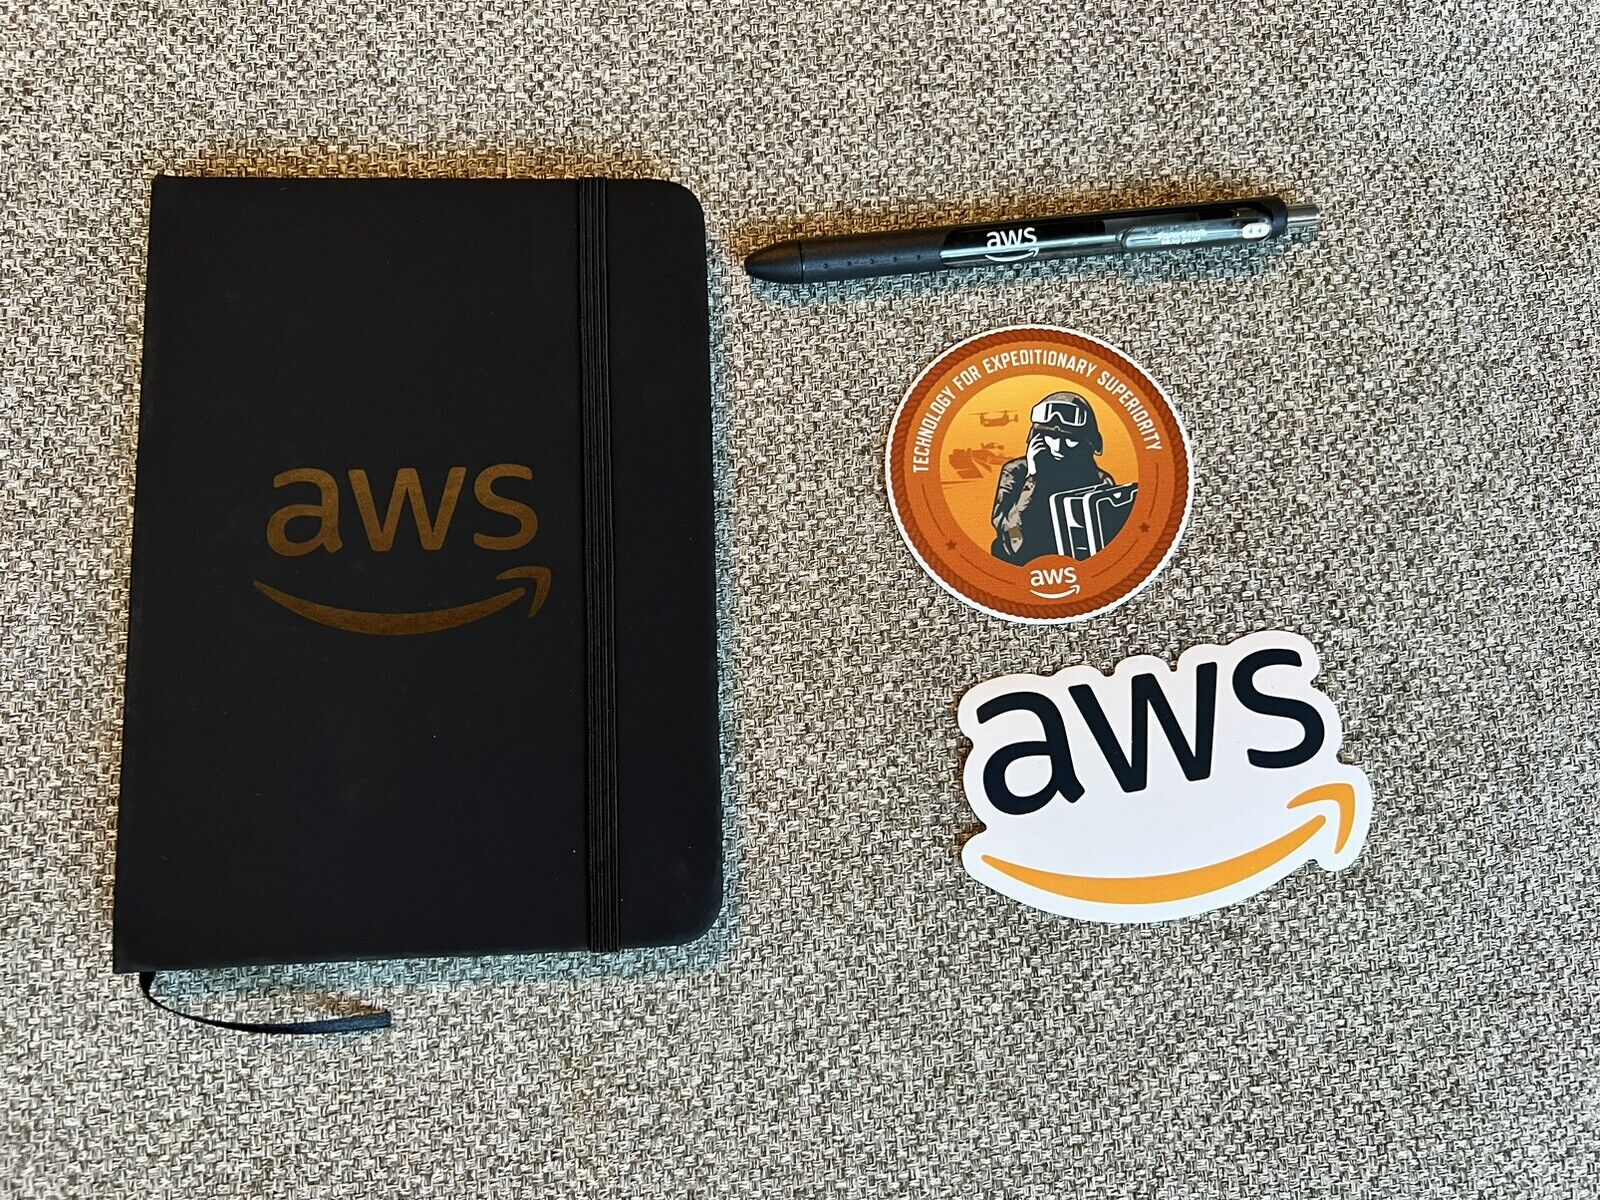 New AWS Amazon Notebook Journal Planner Military Stickers Pen Logo Employee Swag